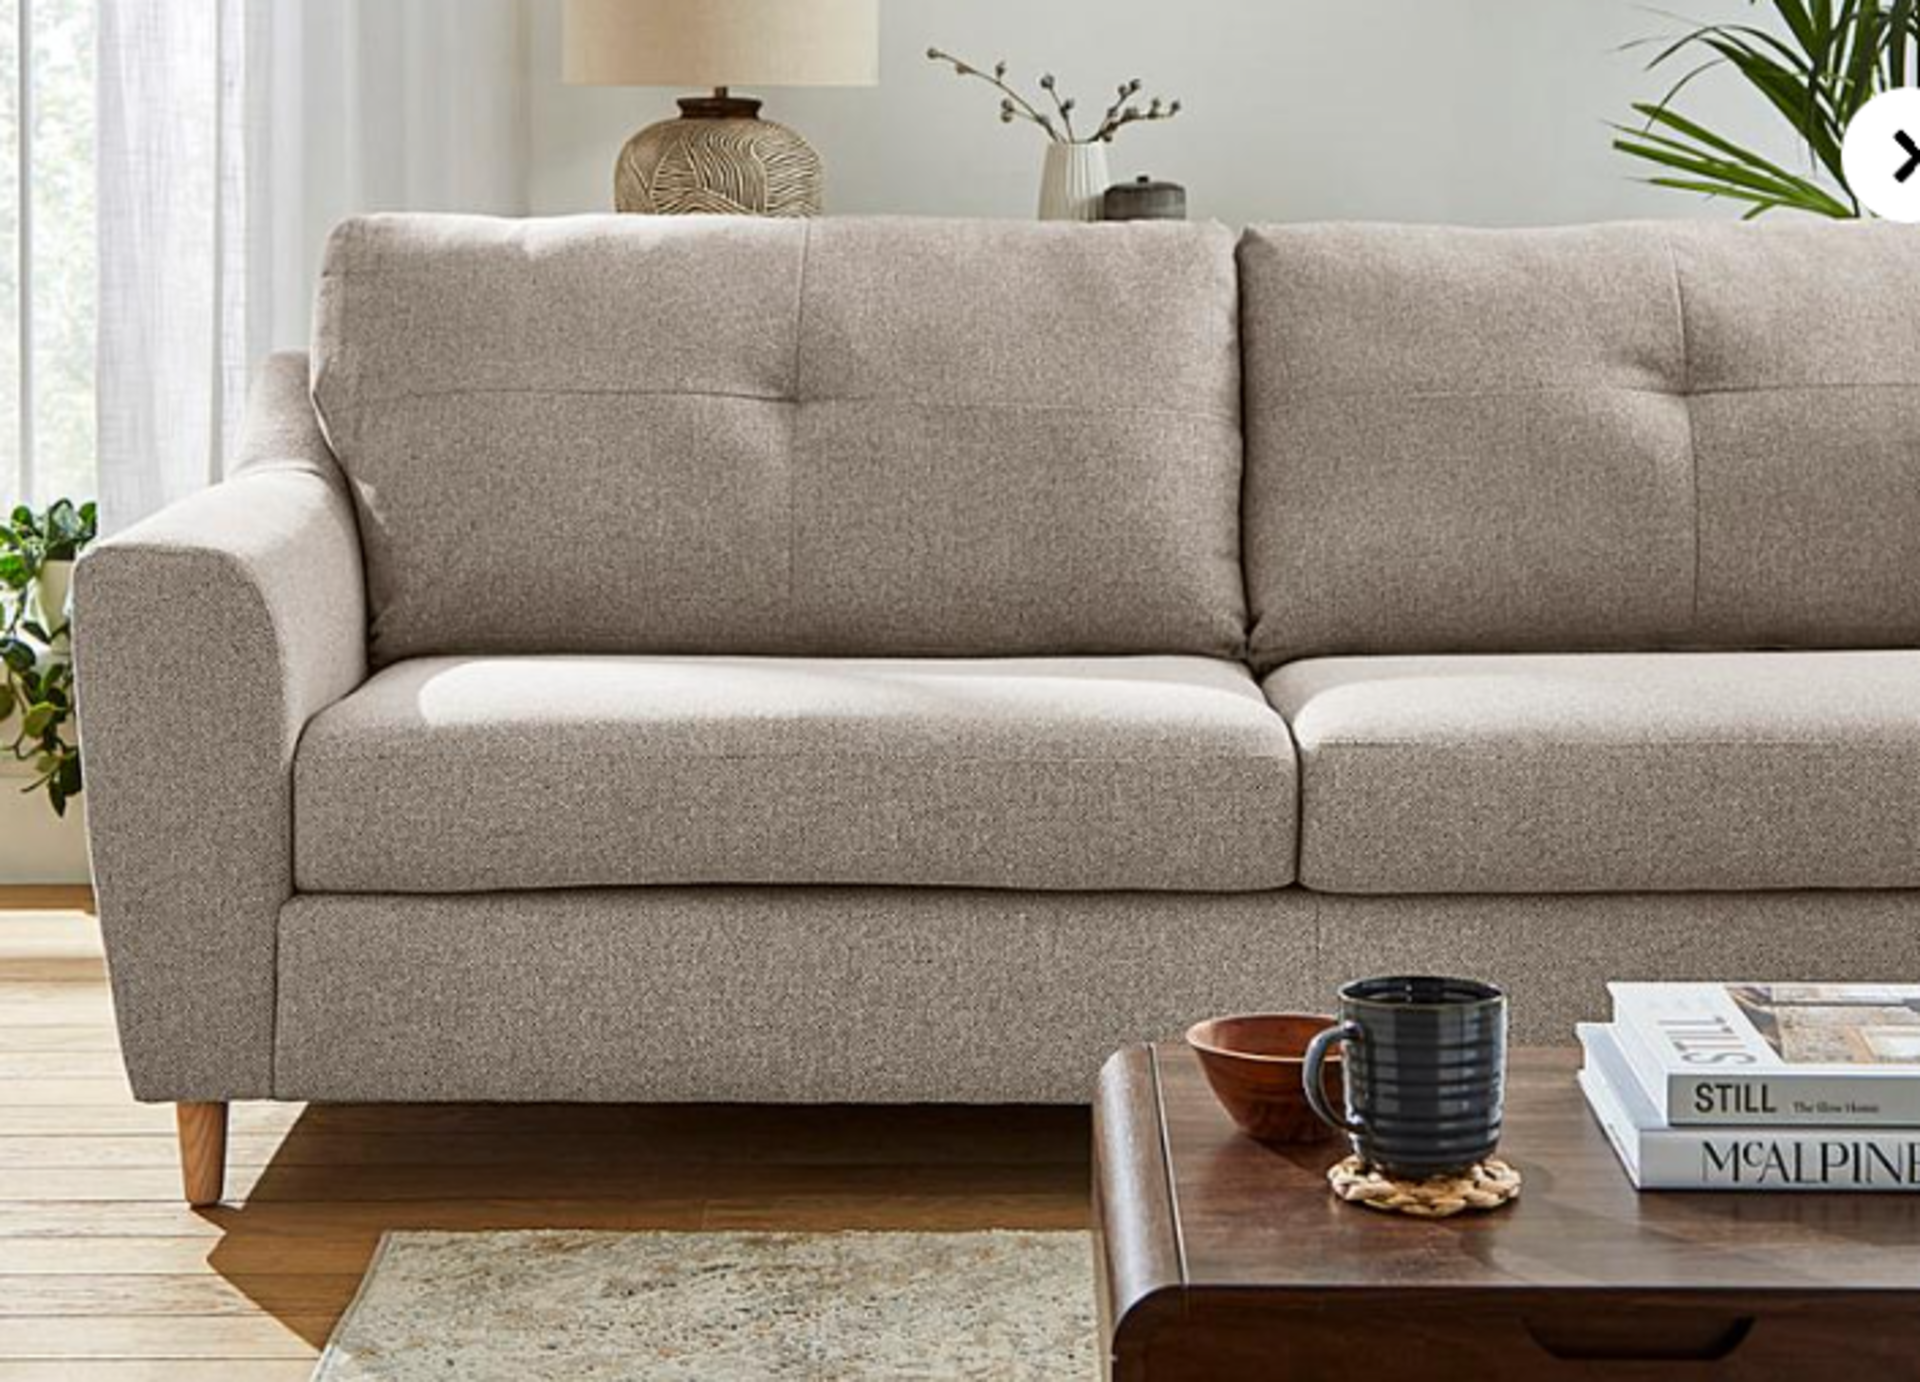 Baxter 4 Seater Sofa. - SR. RRP £999.00. The contemporary style of the Baxter range is both on-trend - Image 2 of 2